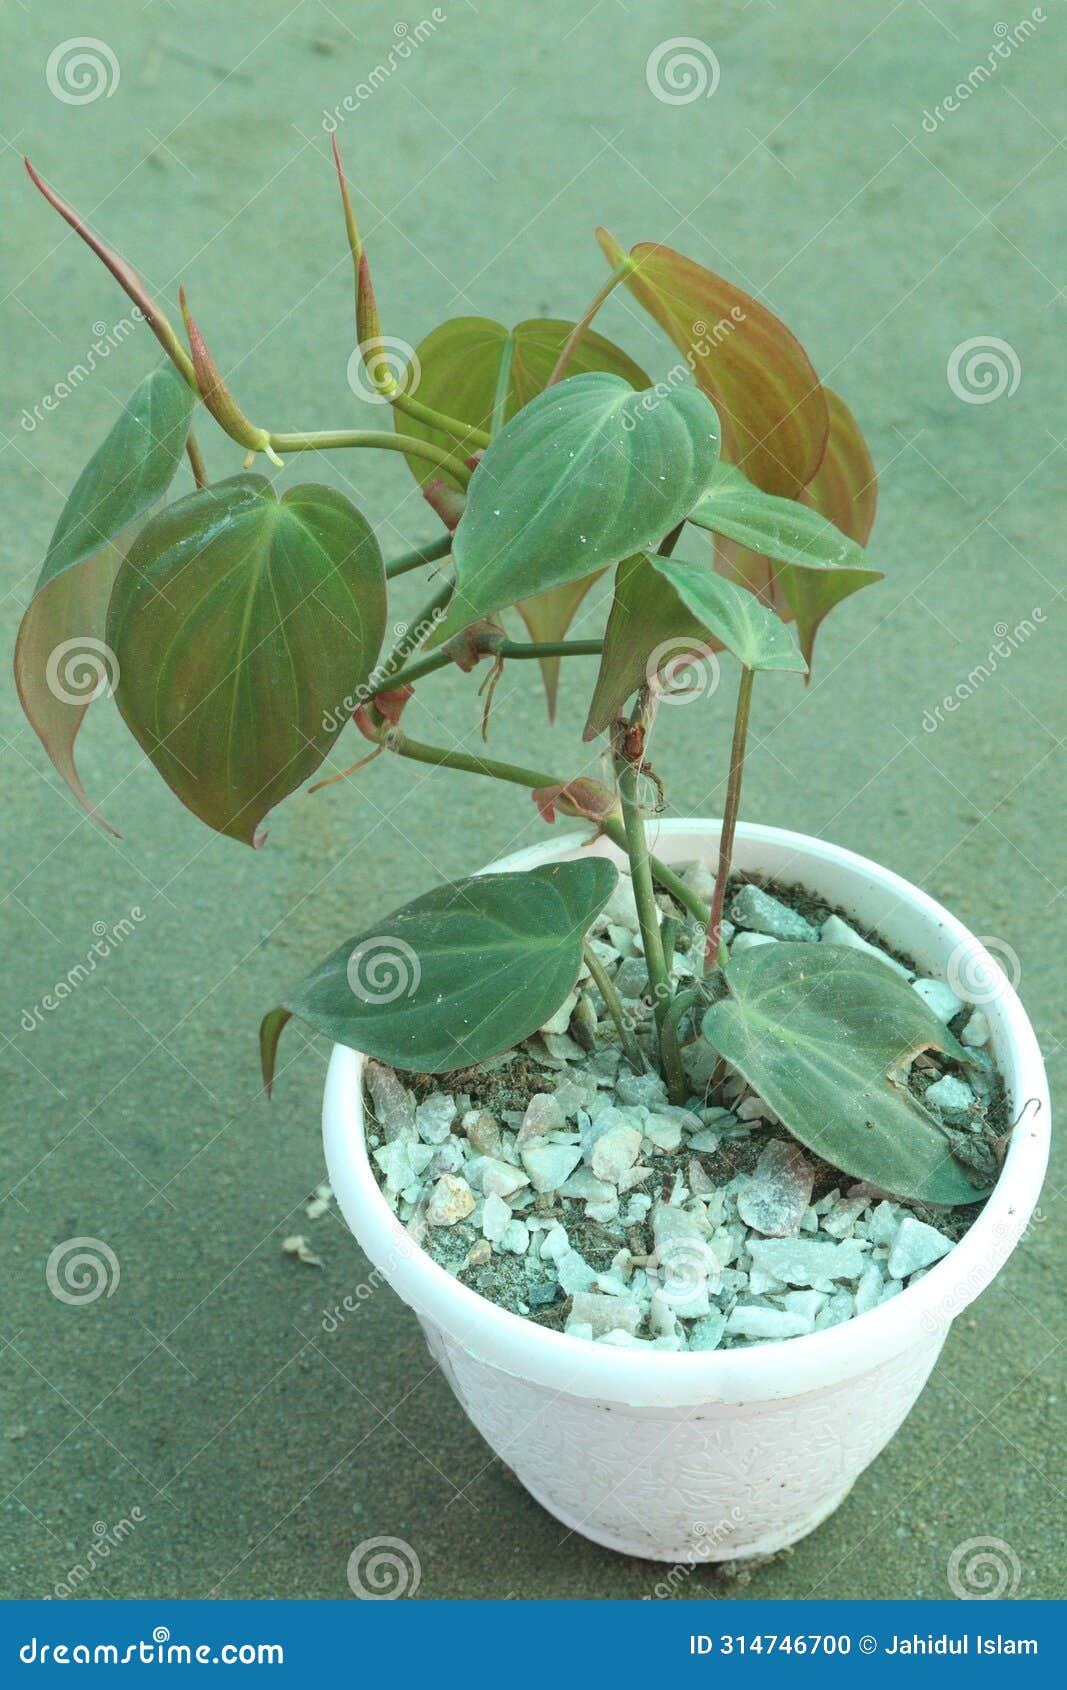 heartleaf philodendron plant on pot in farm